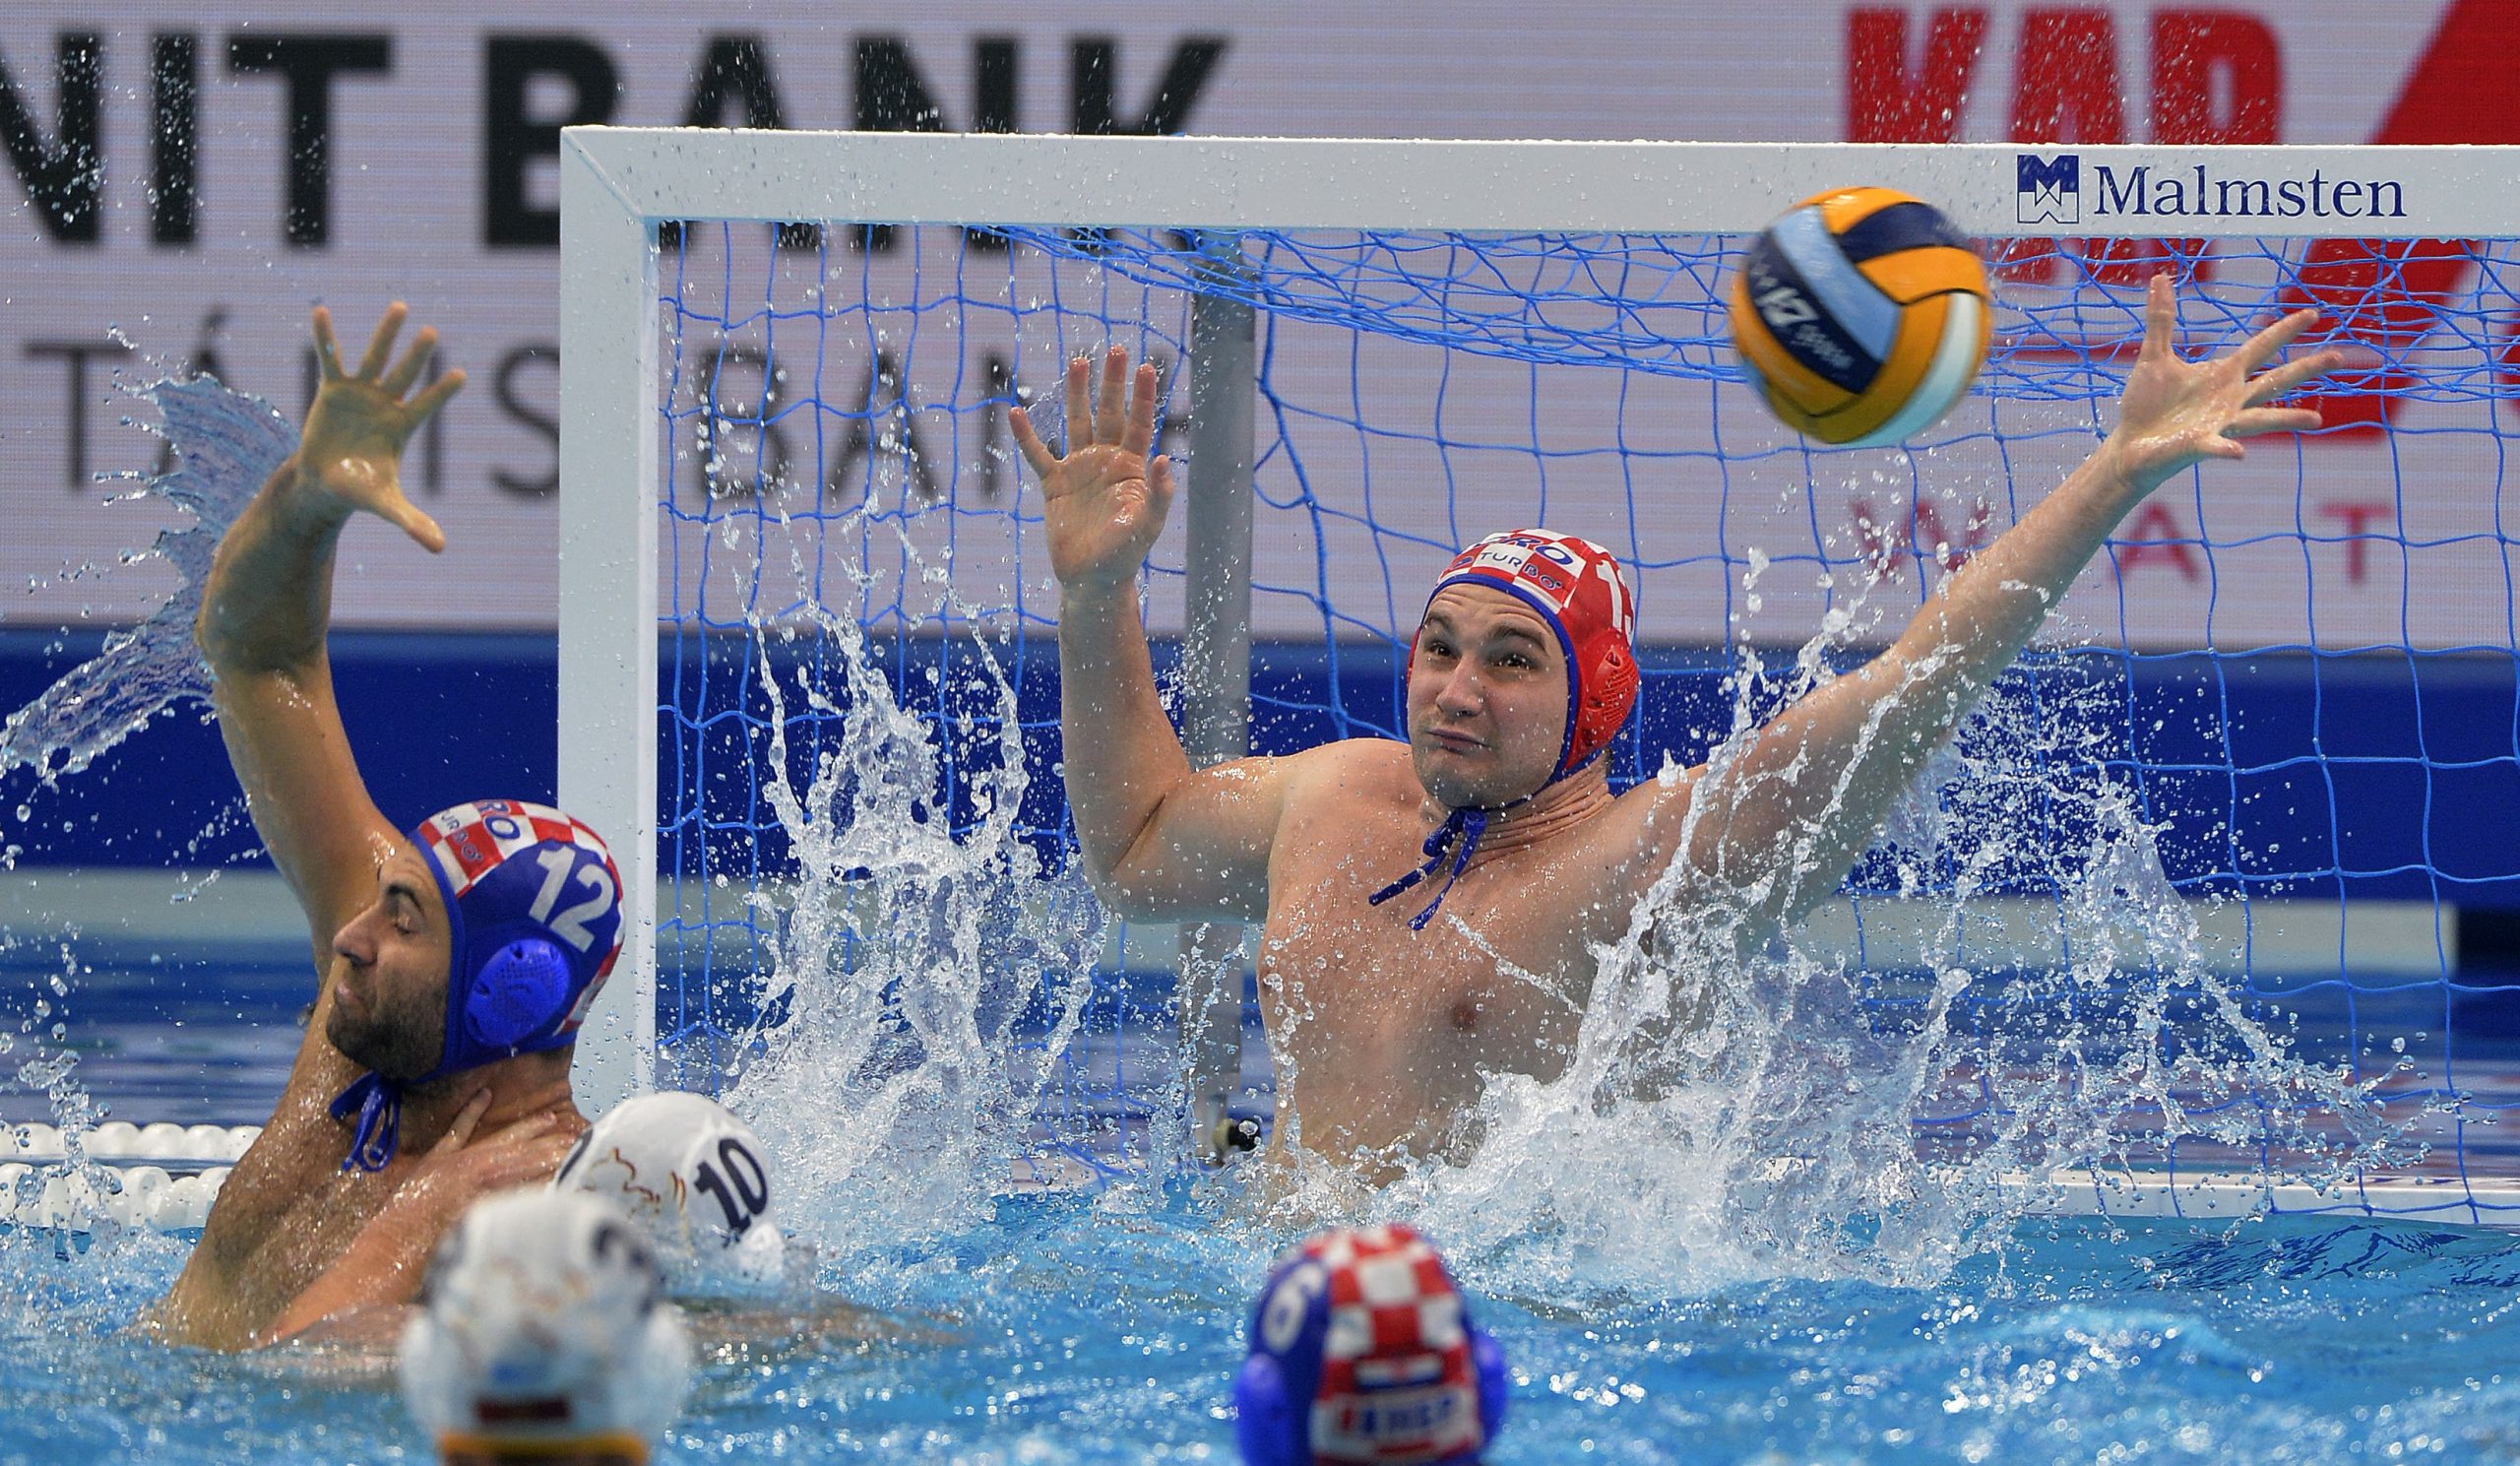 epa08167592 Goalie Ivan Marcelic (R) and Javier Garcia (L) of Croatia try to block a shot during men's European Water Polo Championship match Montenegro vs. Croatia for the bronze medal in Budapest, Hungary, 26 January 2020.  EPA/Balazs Czagany HUNGARY OUT